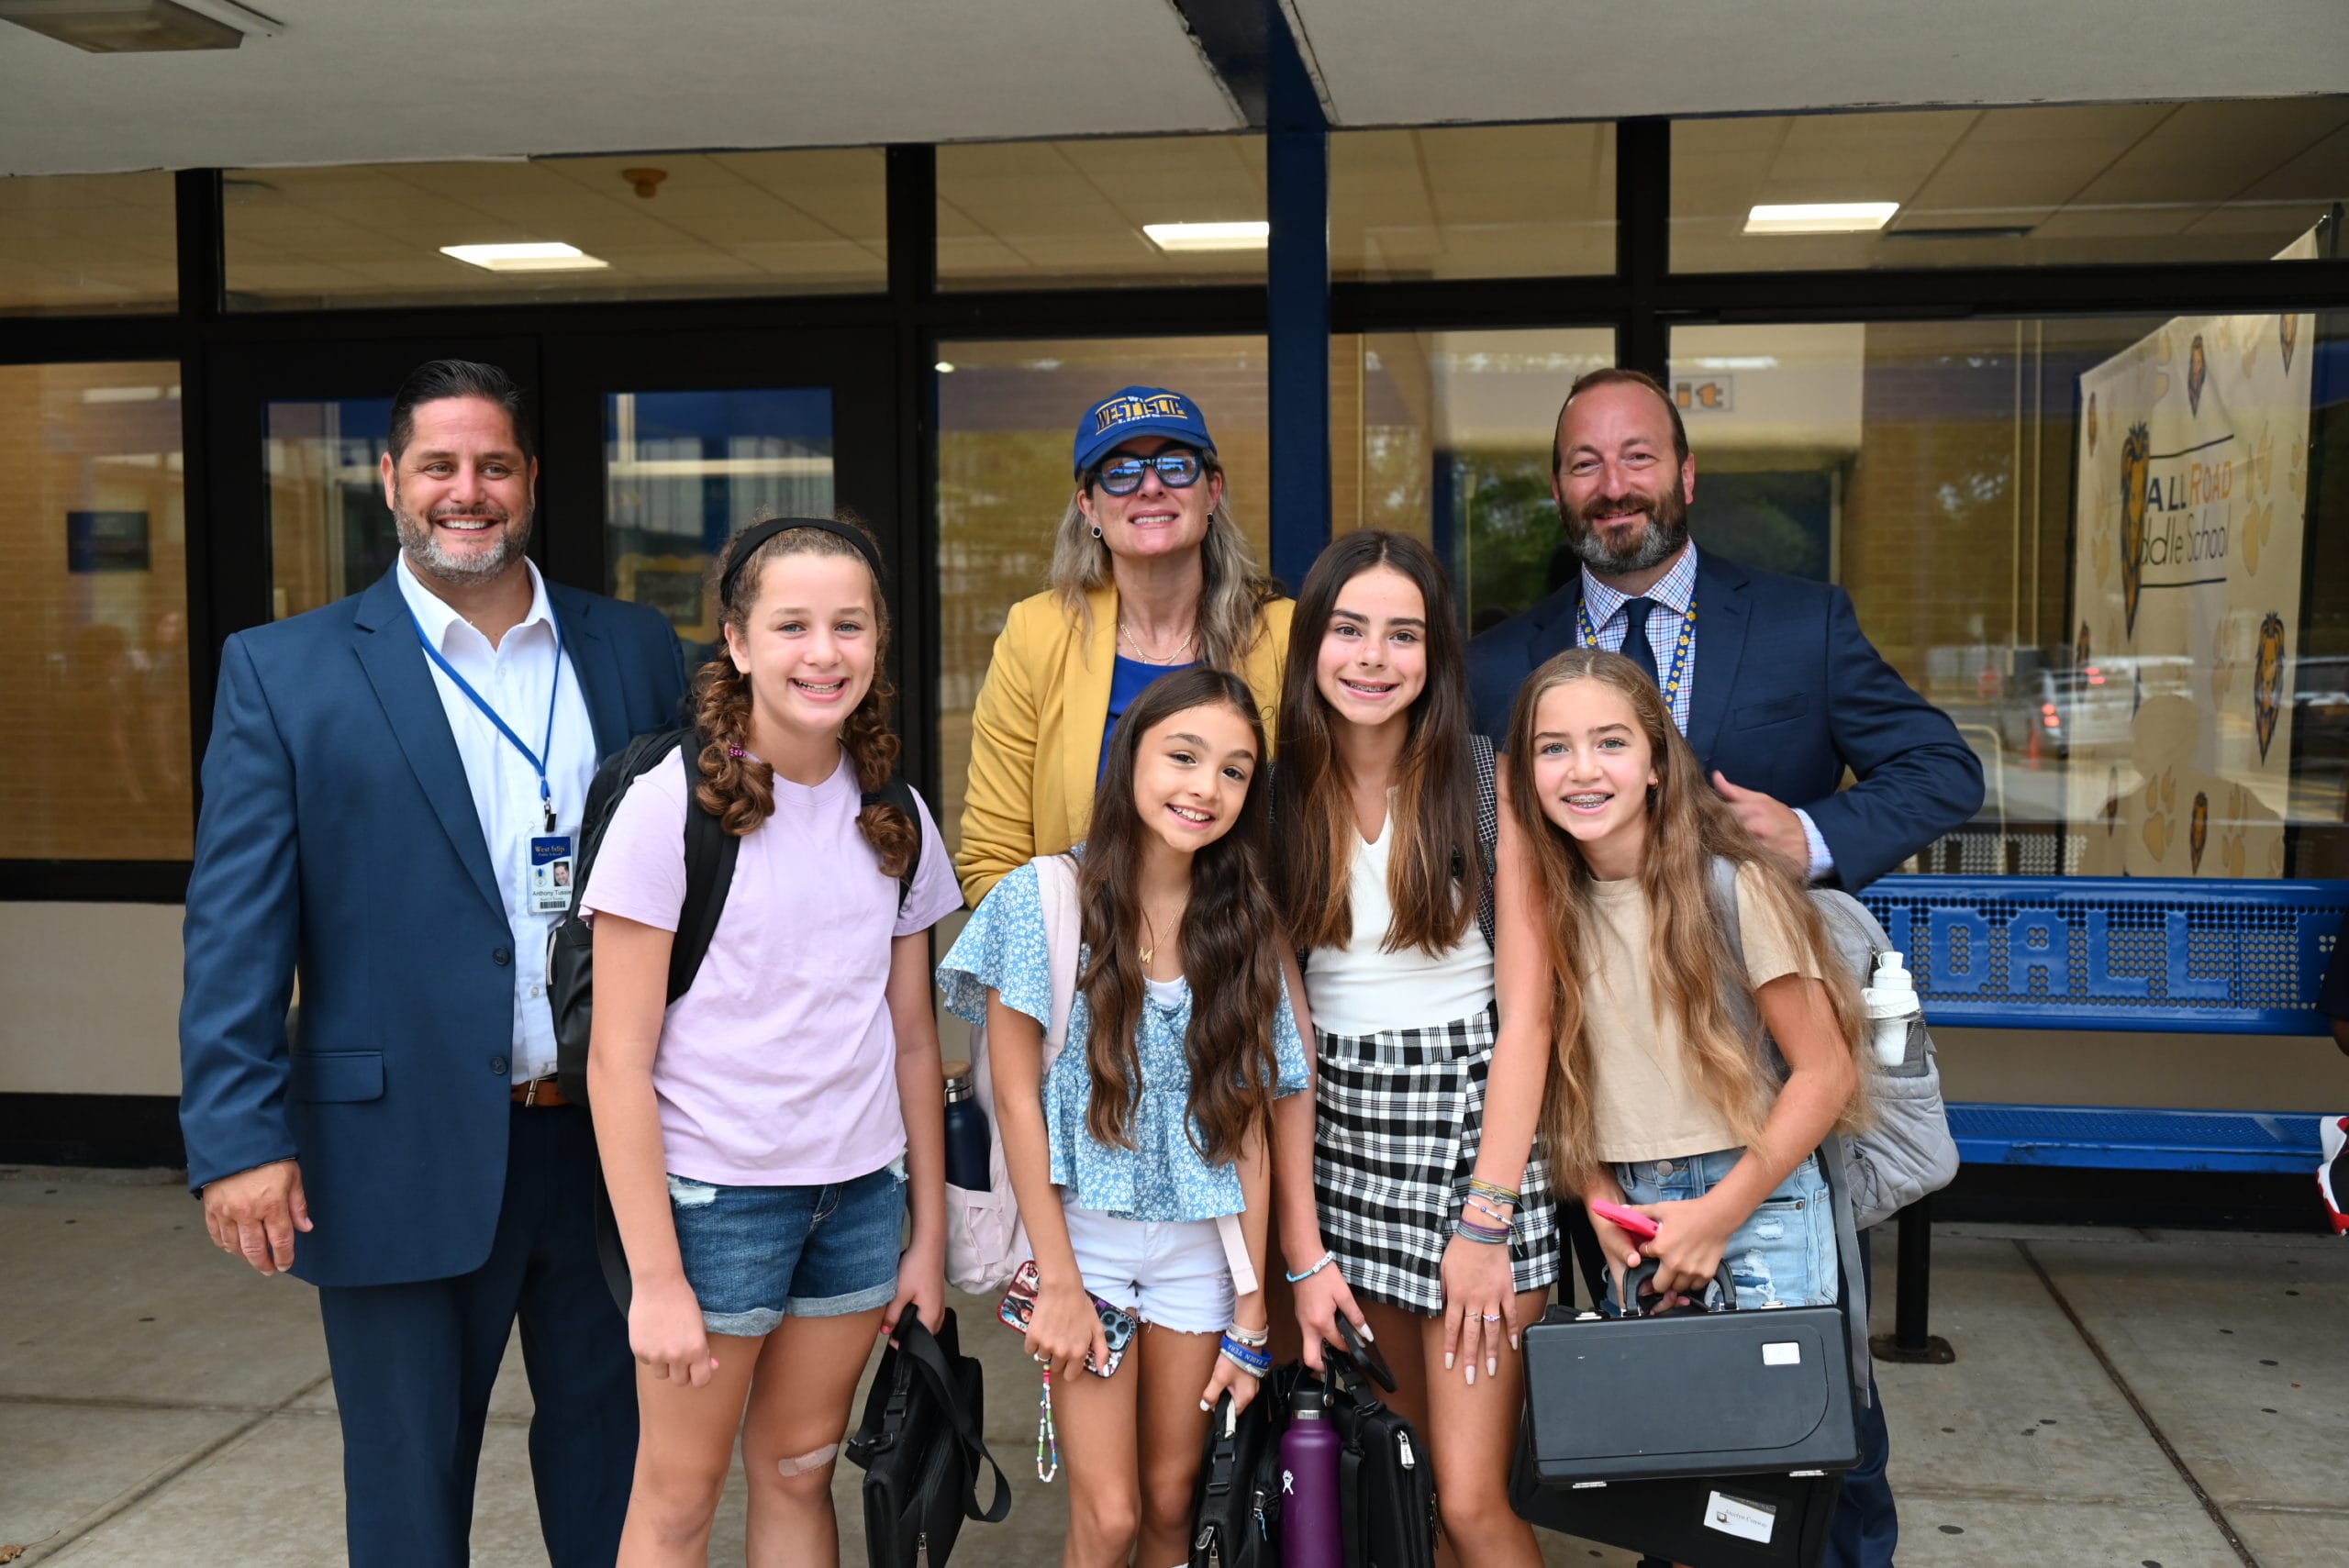 warms-wishes-for-a-new-school-year-in-west-islip-long-island-media-group